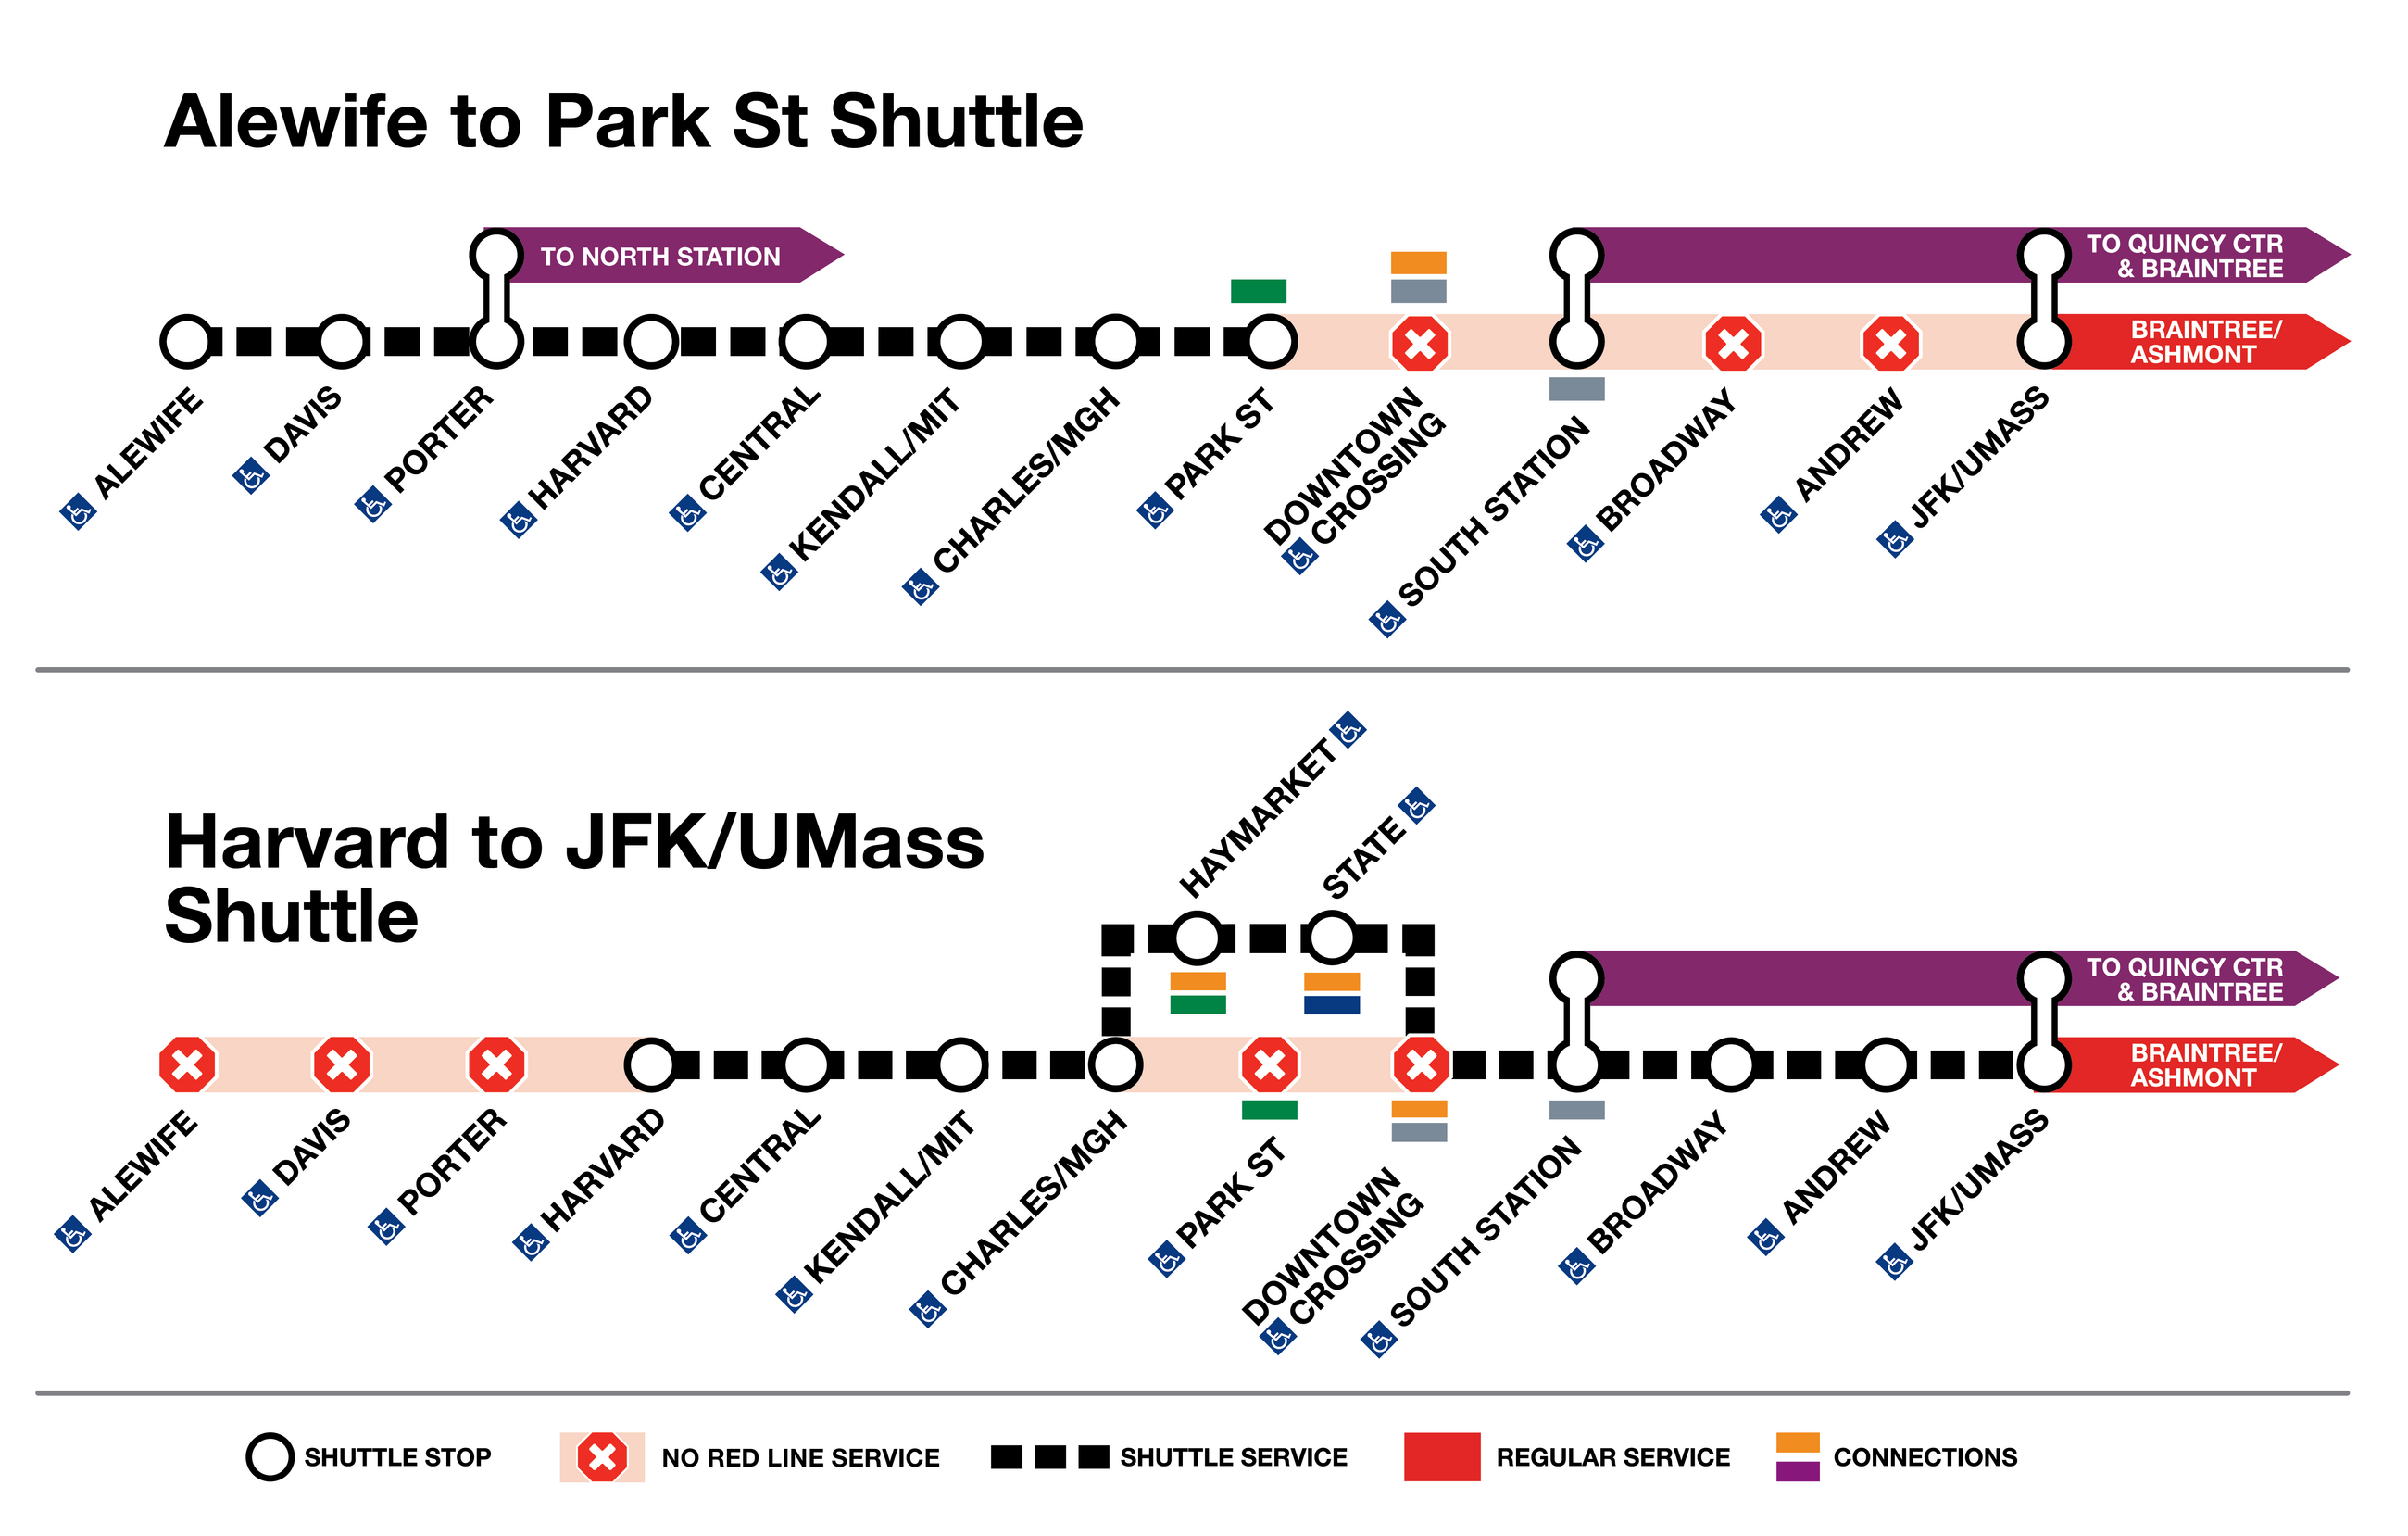 Shuttle service for the July 27 - 28 red line closure. There are two shuttle routes available. Shuttle 1 makes all stops between Alewife and Park Street. Shuttle 2 makes all stops between Harvard and JFK/UMass except for Park Street and Downtown Crossing. Shuttle 2 will also stop at Haymarket and State for connections to the Orange, Green, and Blue lines.